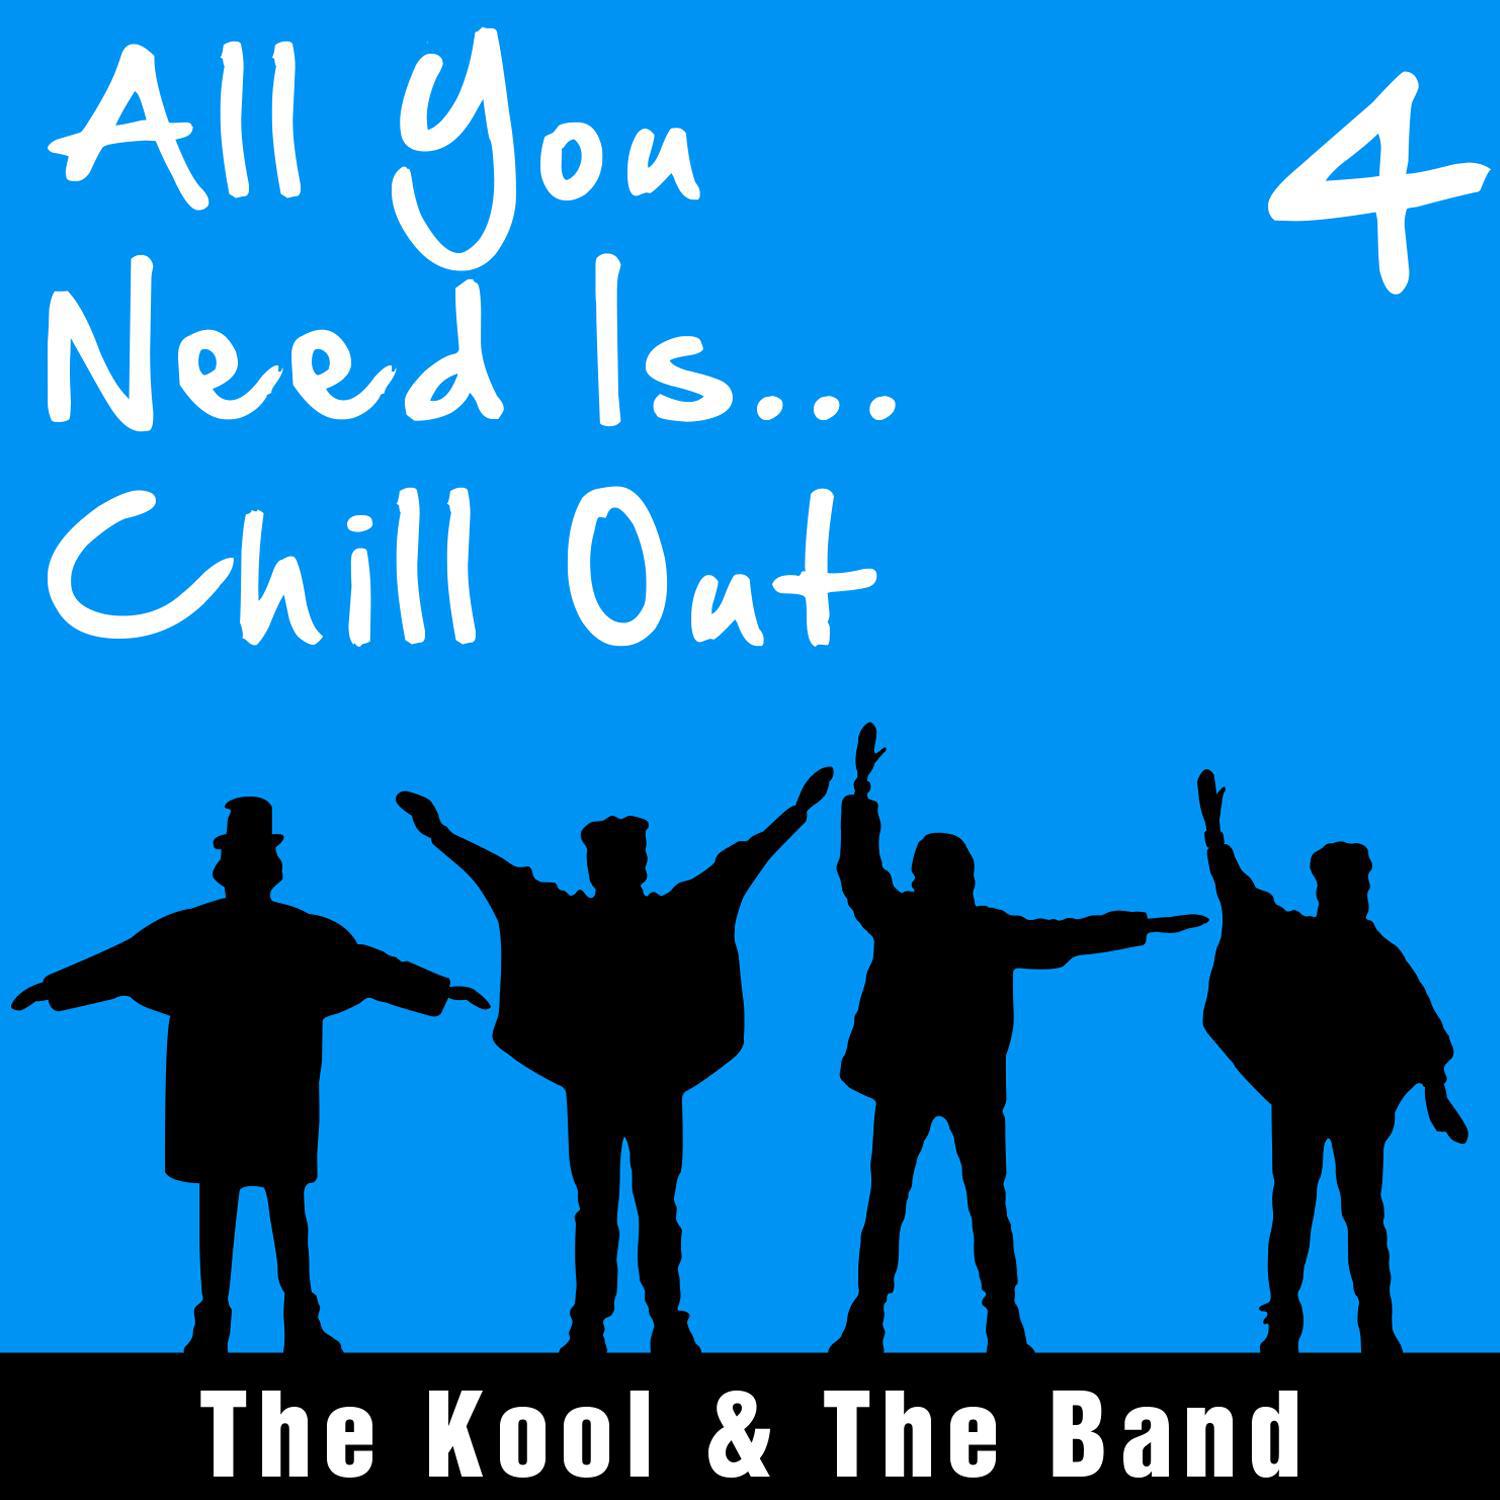 All You Need Is Chill out, Vol. 4